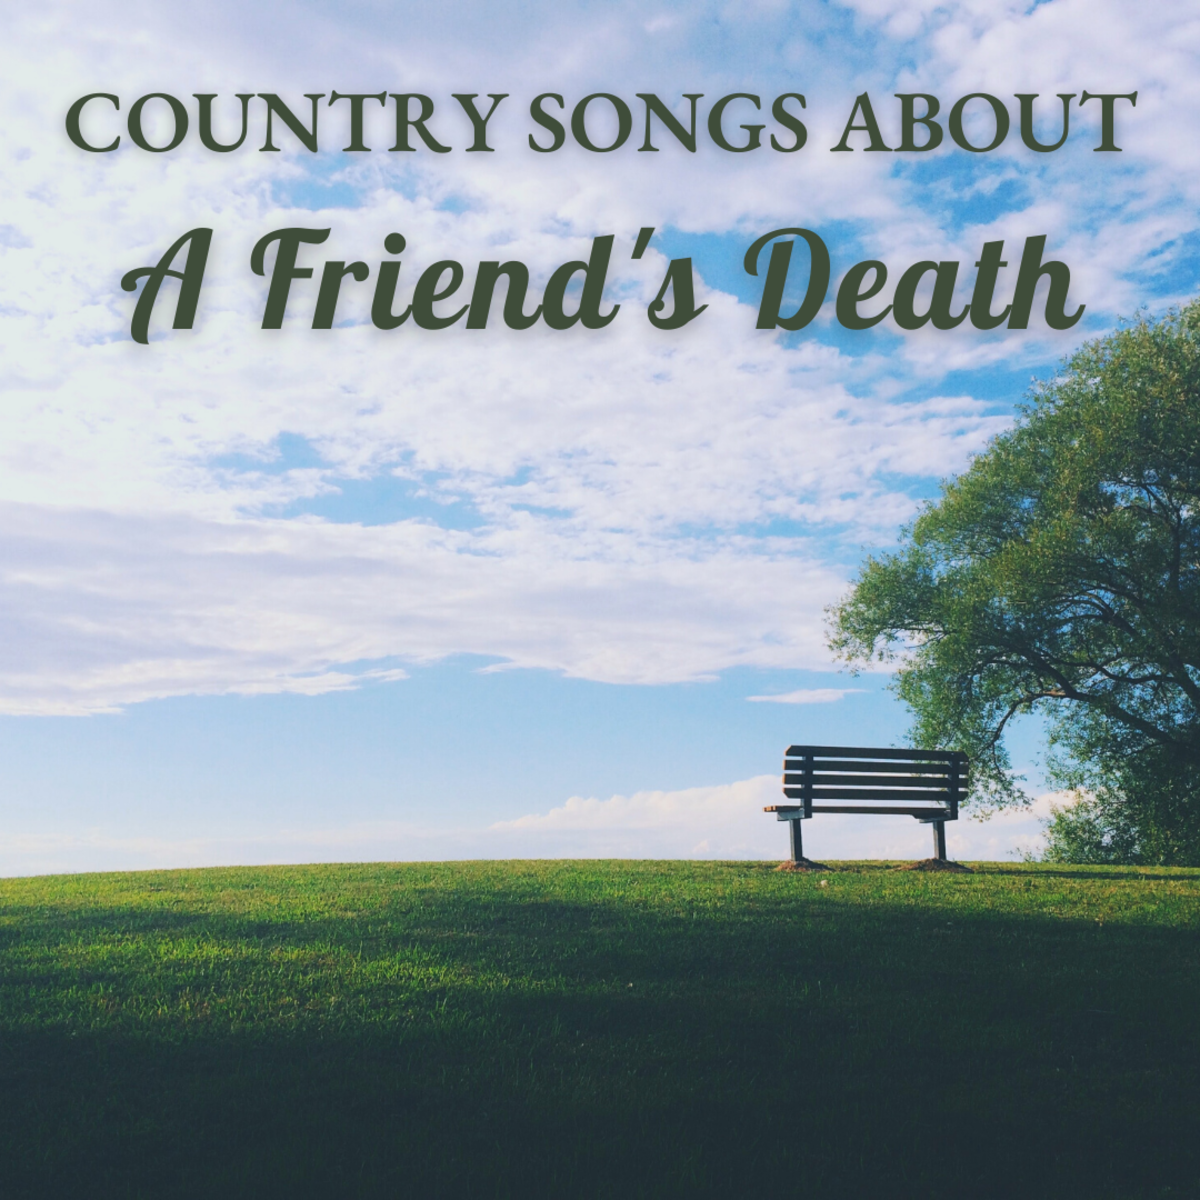 7 Country Songs About the Death of a Friend